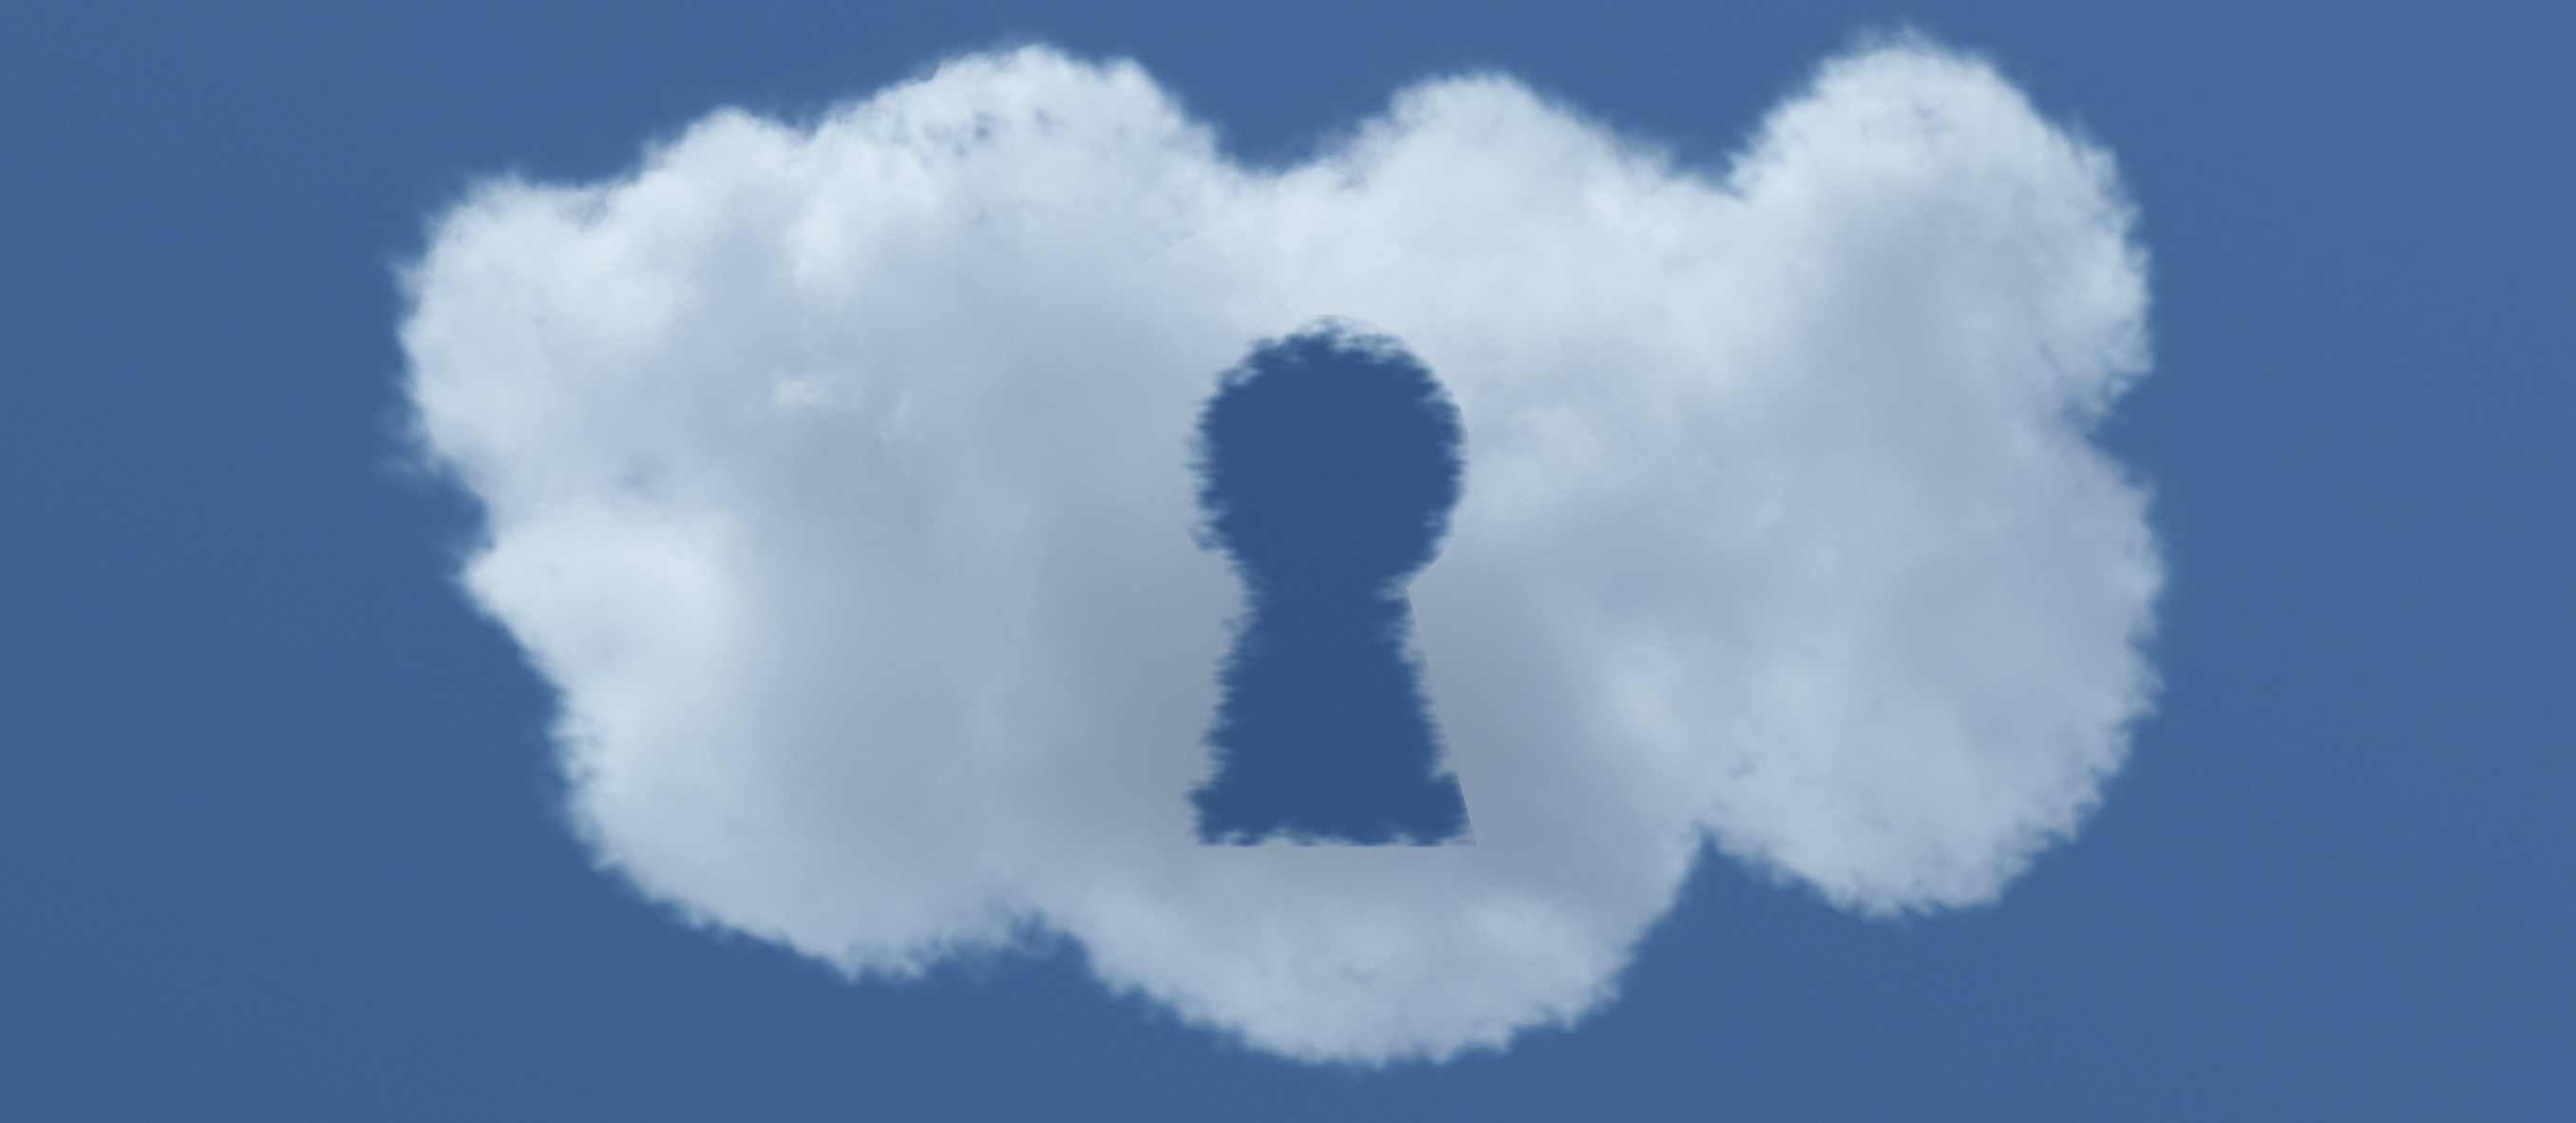 Could Industry Follow DoD Cloud Security Lead?